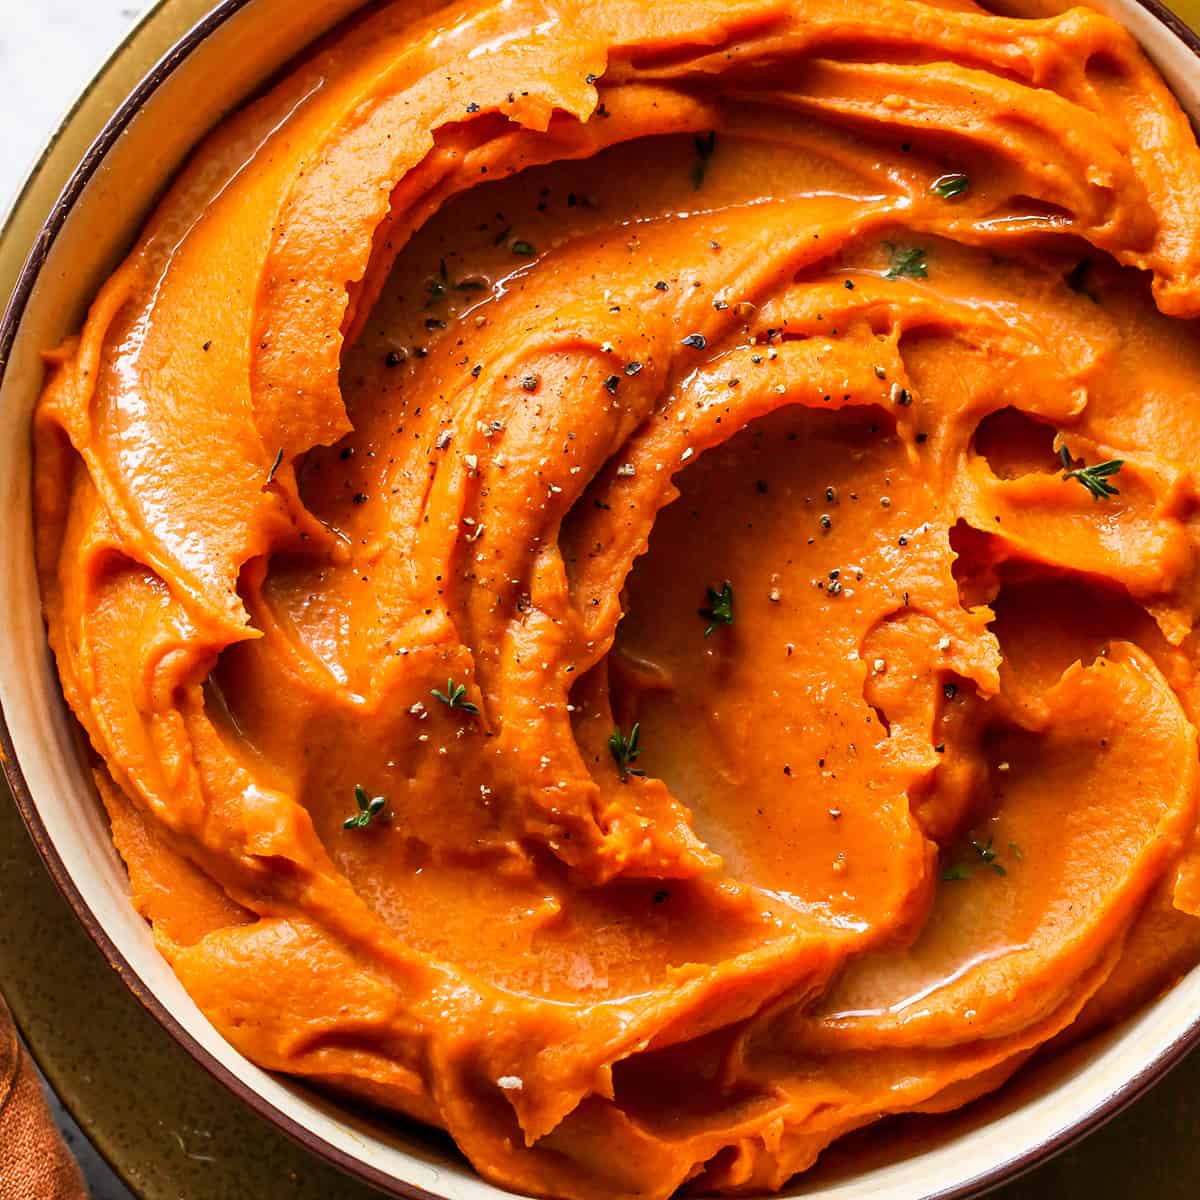 Mashed Sweet Potatoes in a bowl garnished with melted butter and chopped thyme